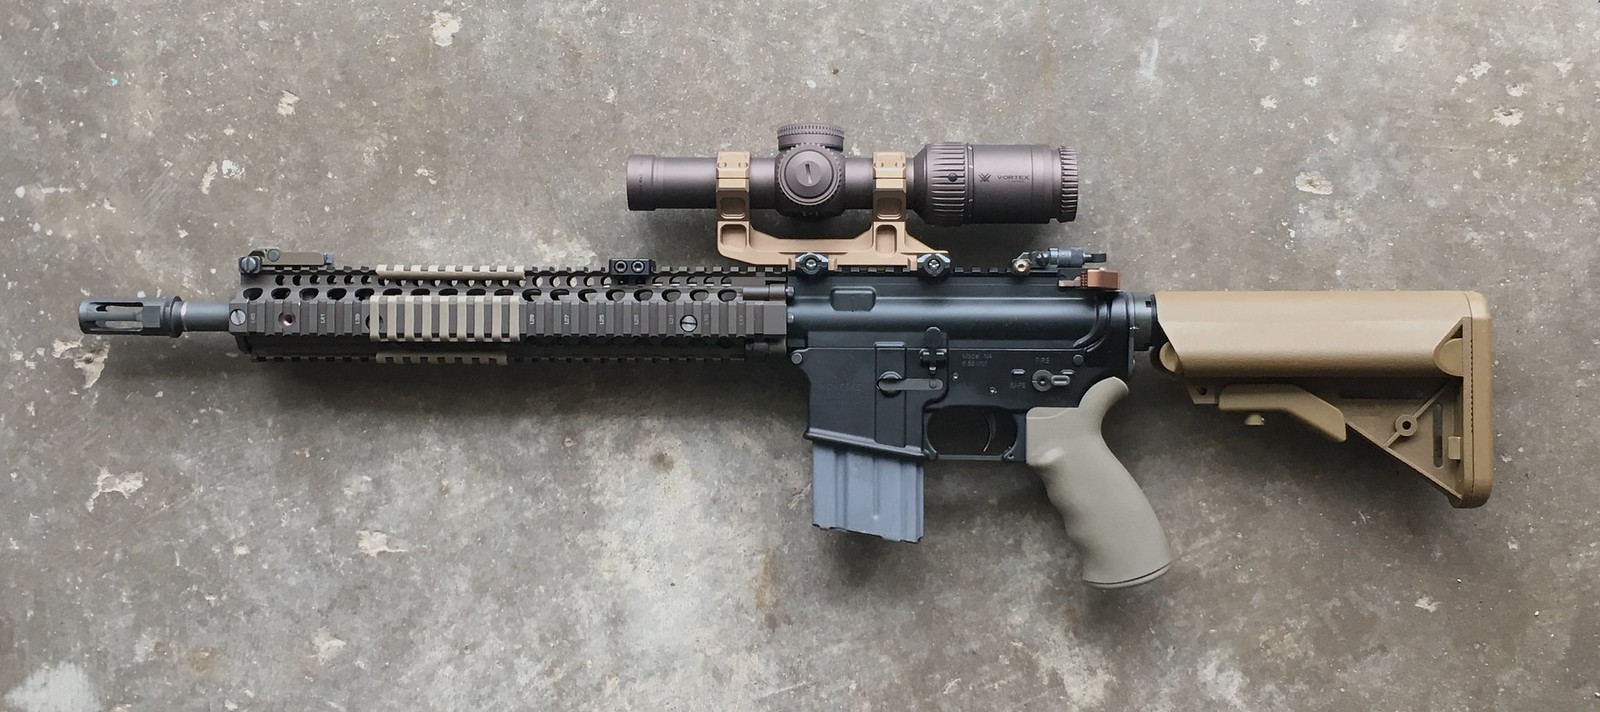 The Official Geissele Picture Thread - Page 23 - AR15.COM